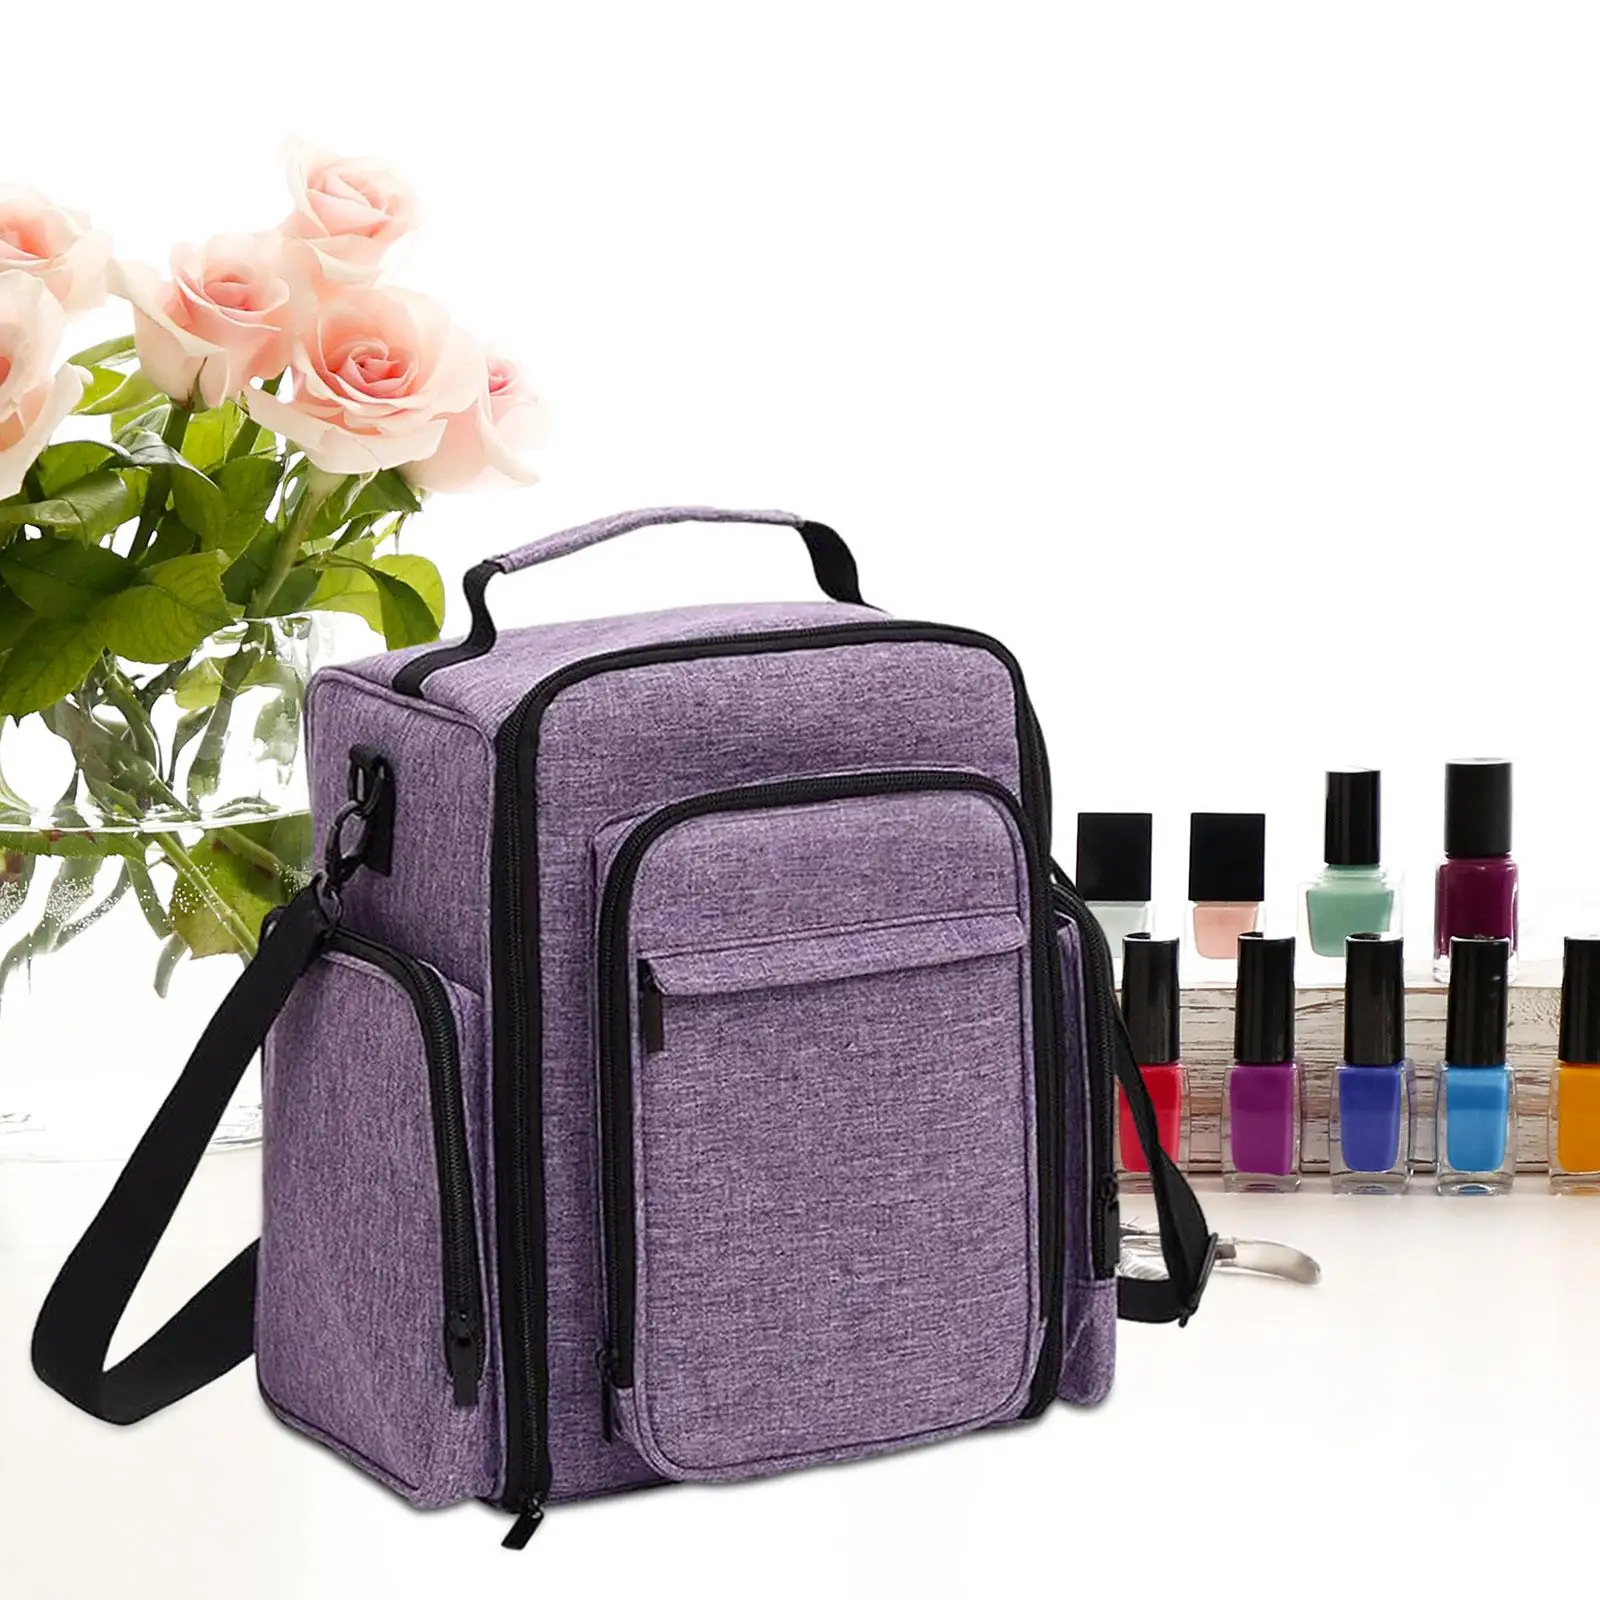 Nail Tool Organizer with Removable Pouch Travel Makeup Bag Organizer Toiletry Bag Nail Polish Carrying Case Bag for Home Indoor